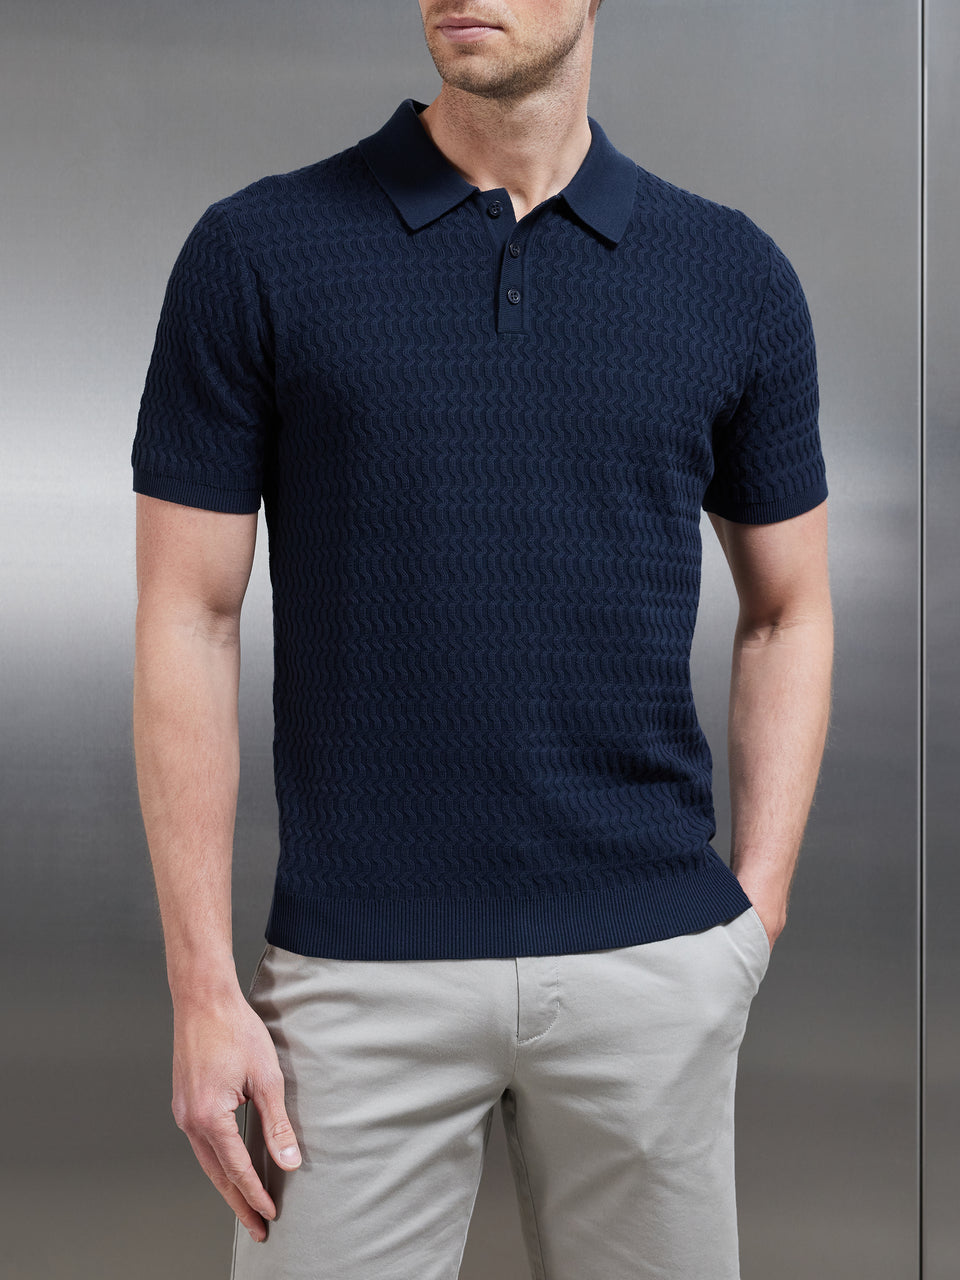 Cotton Knitted Textured Button Polo Shirt in Navy